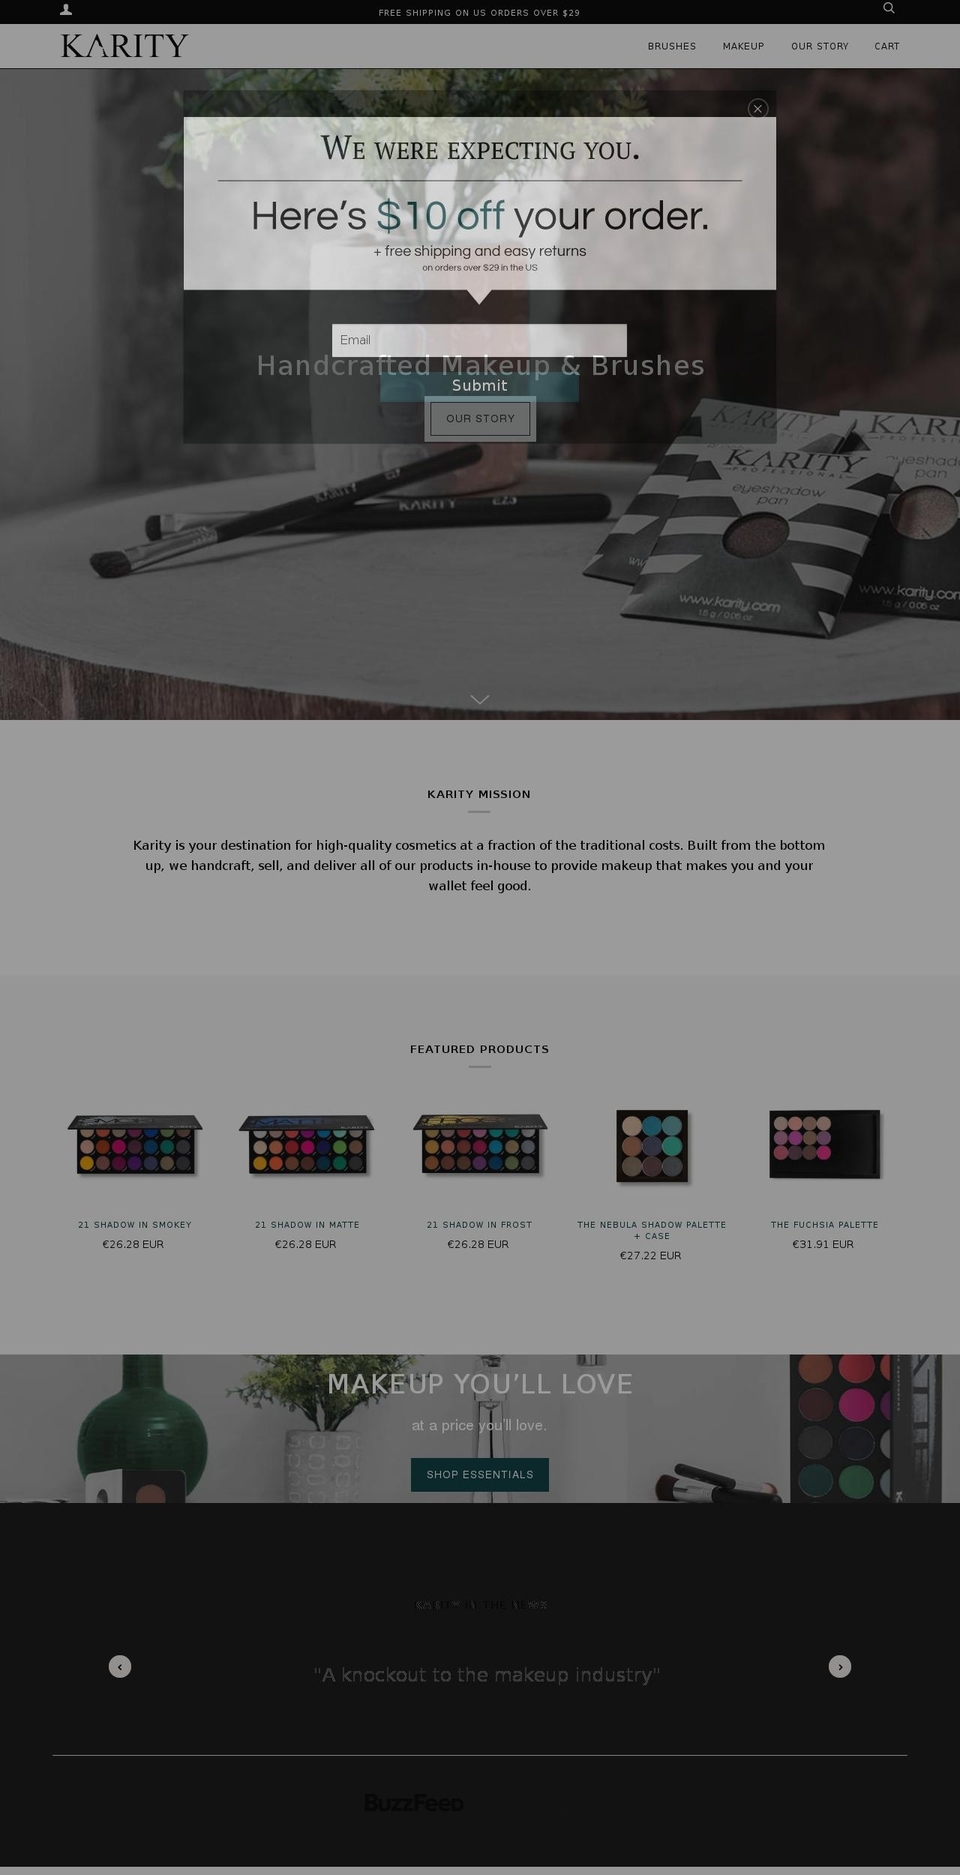 Pipeline Shopify theme site example karity.com